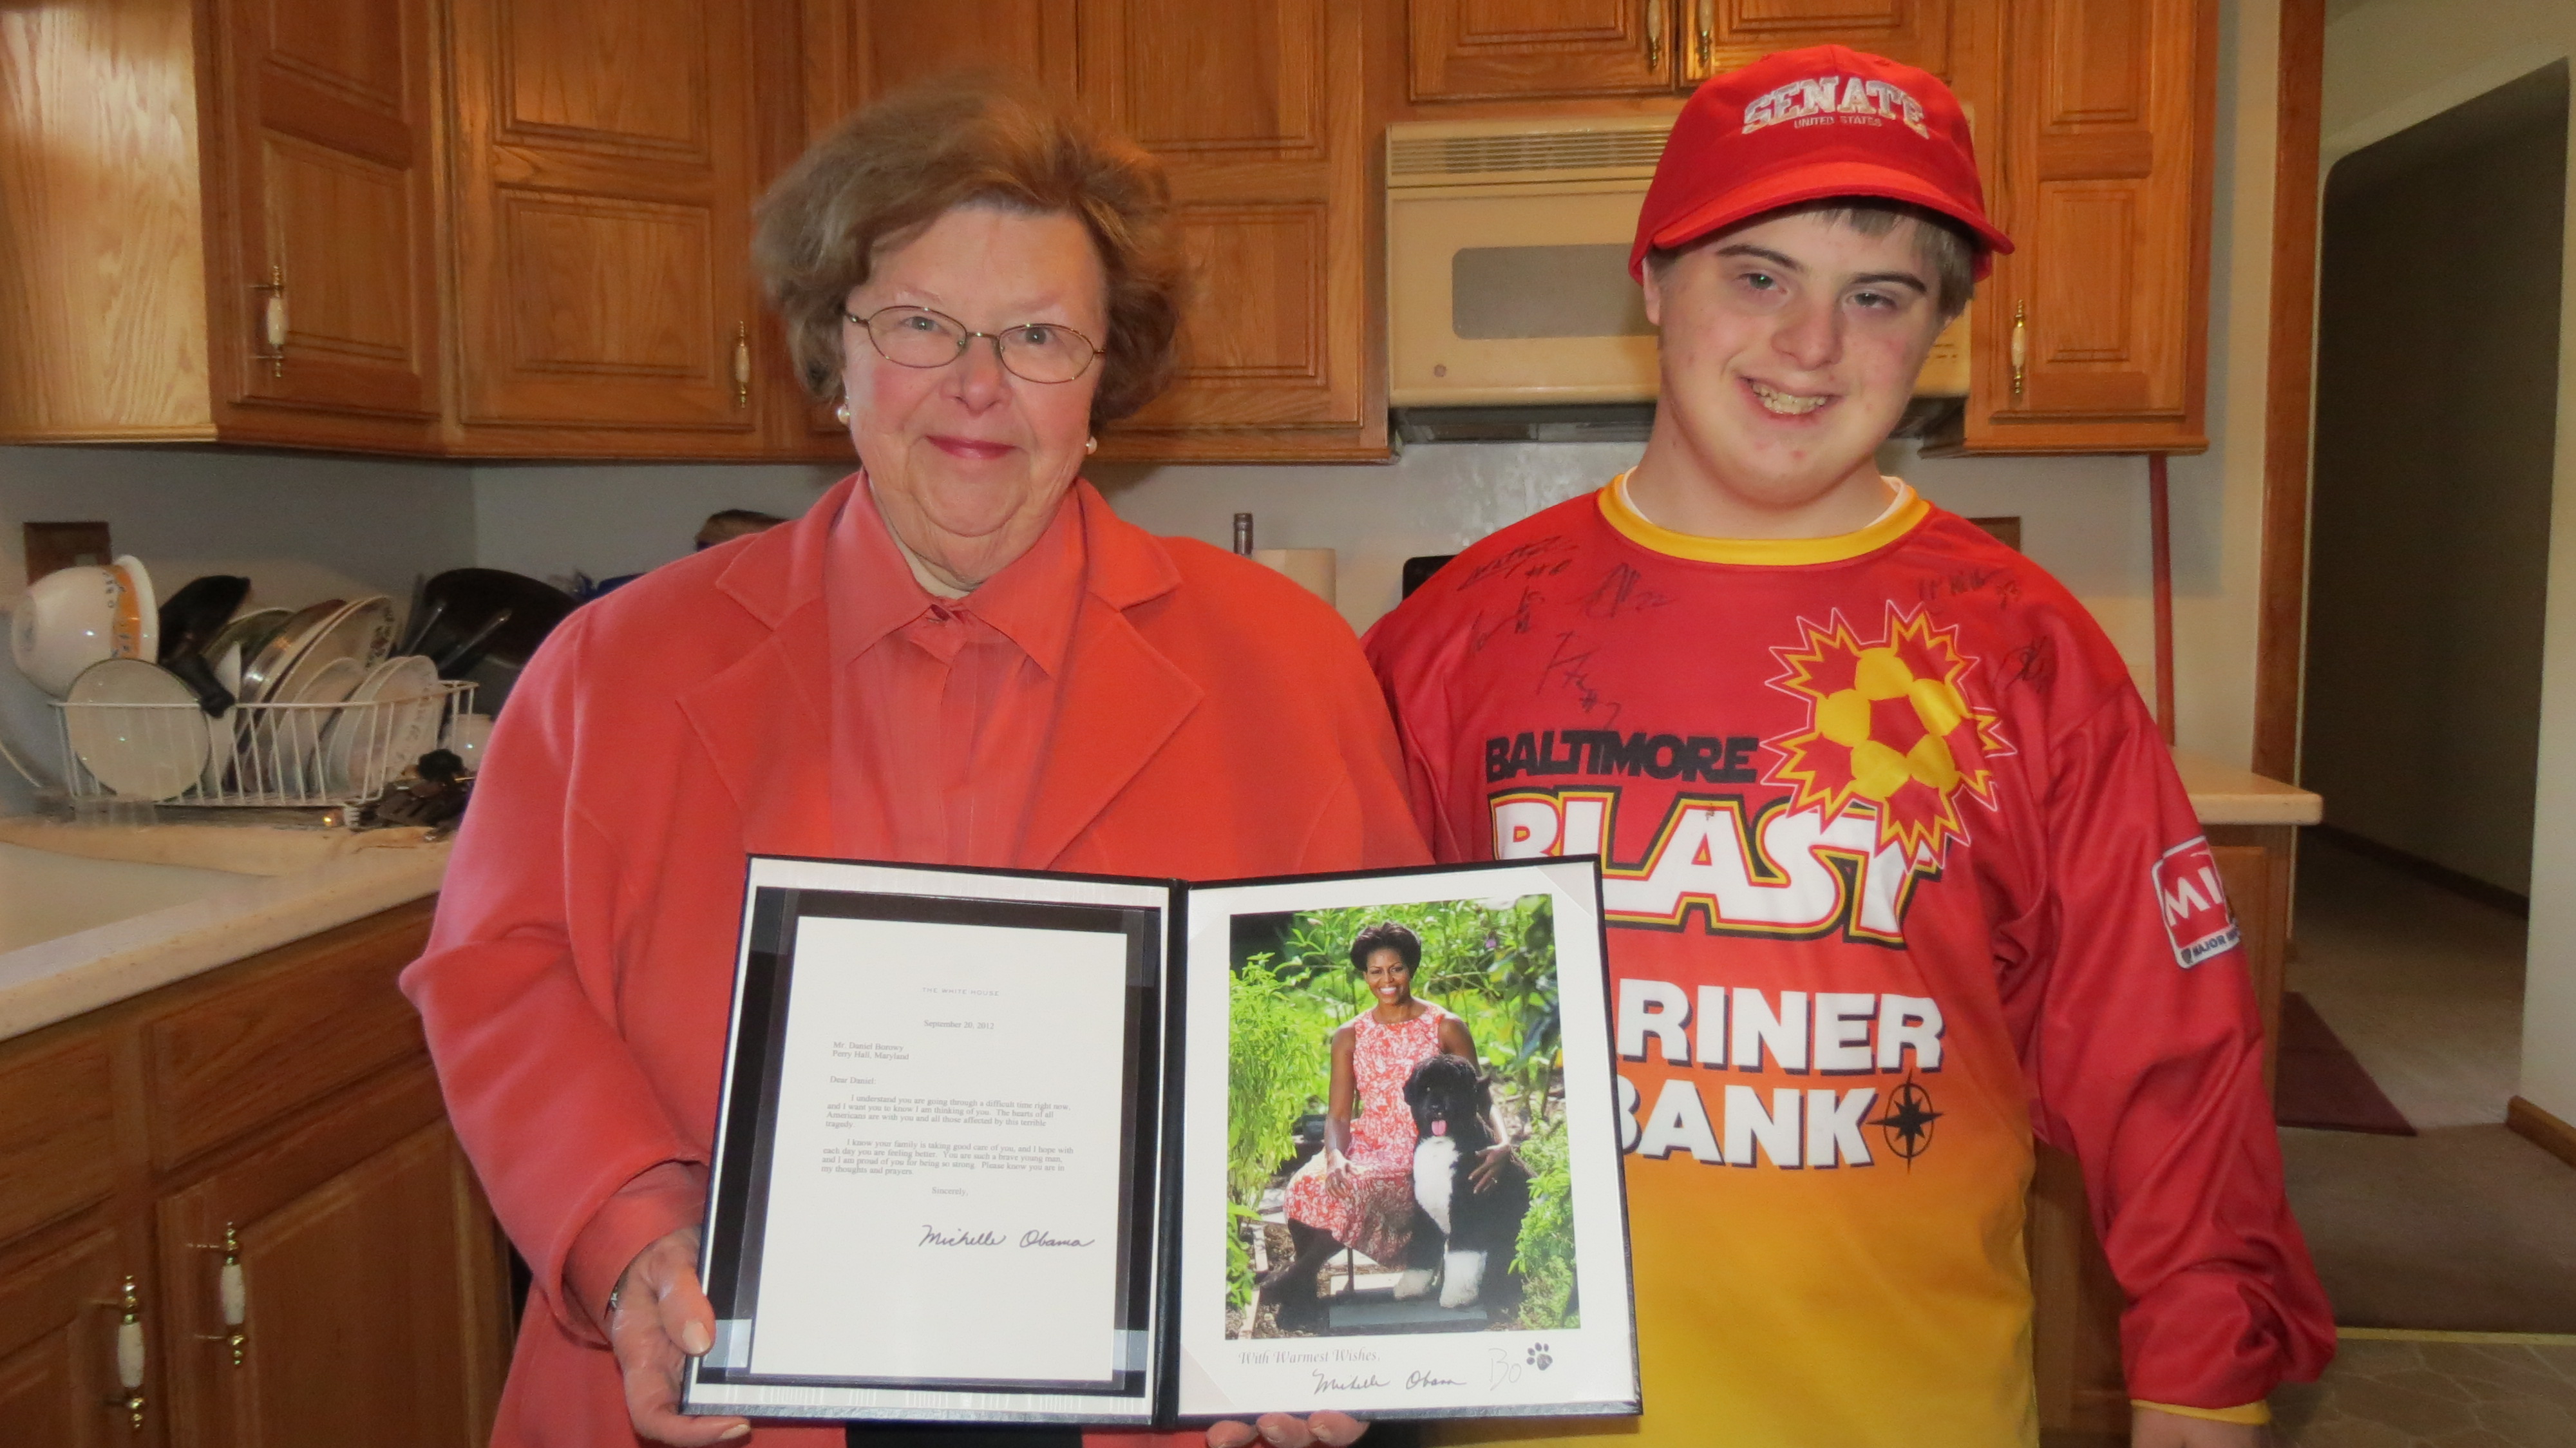 Senator Mikulski visited Perry Hall student Daniel Borowy and his family as he recovers.